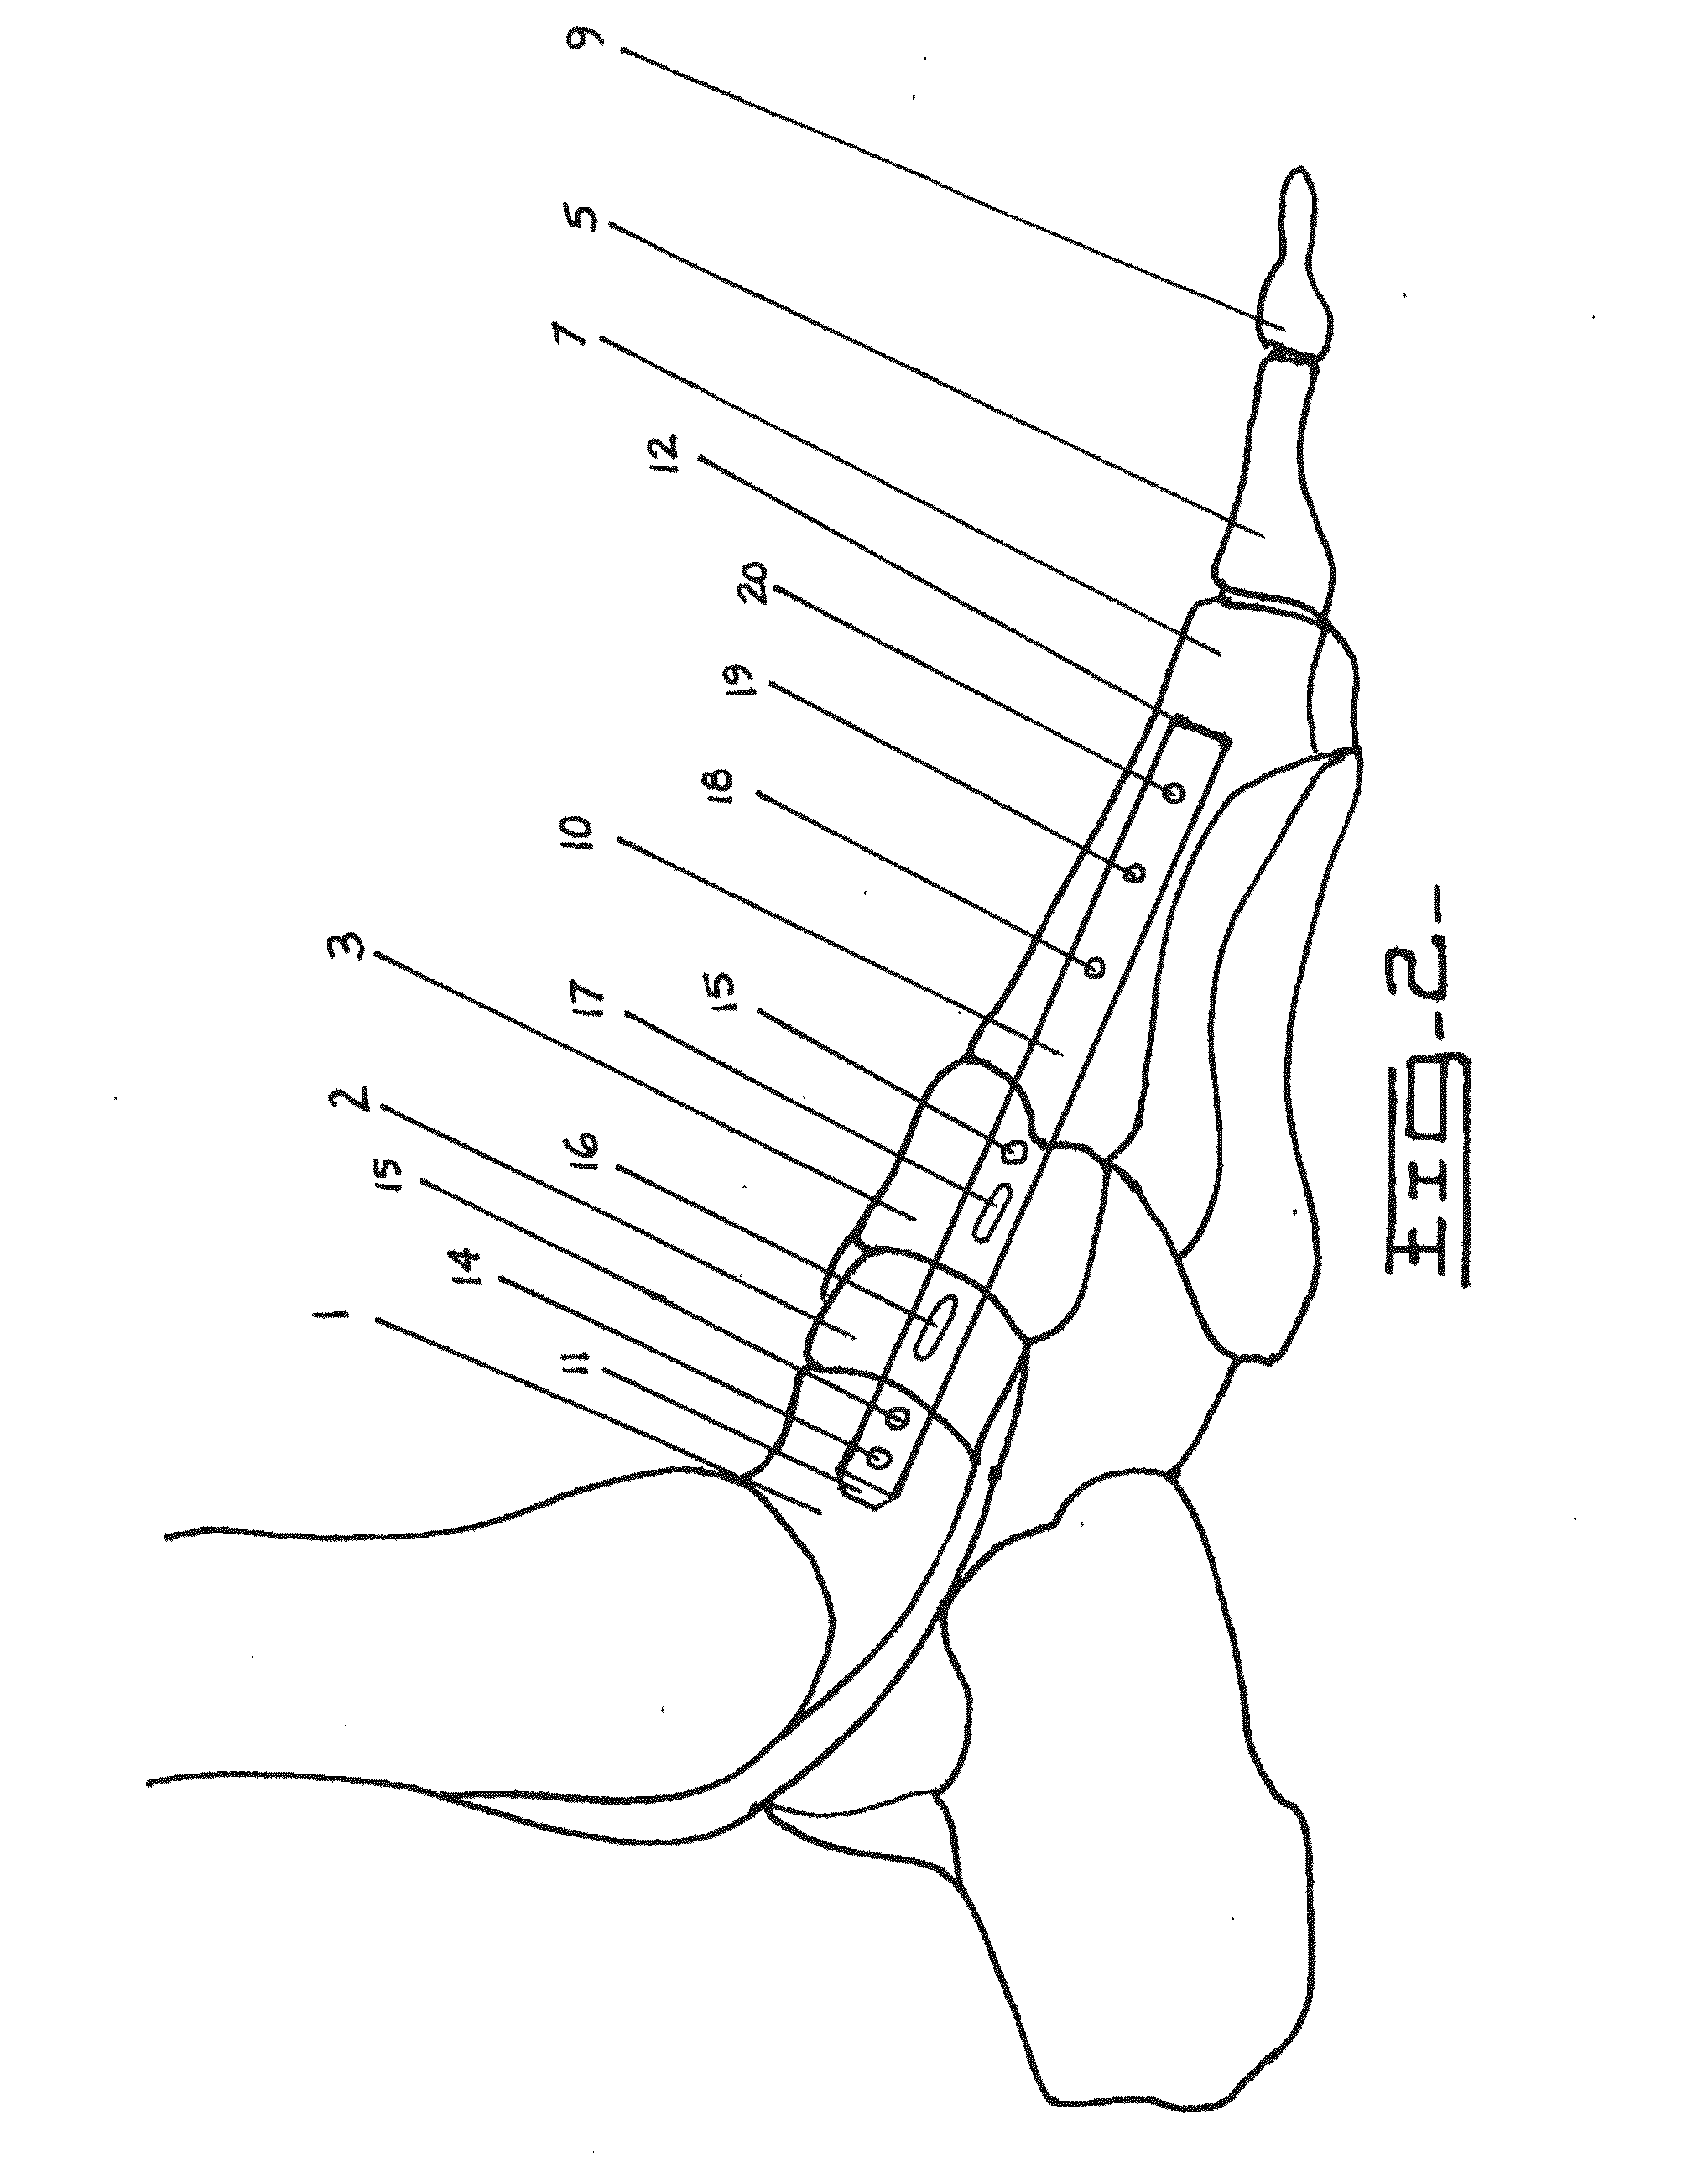 Method and Apparatus for Repairing the Mid-Foot Region Via and Intramedullary Nail